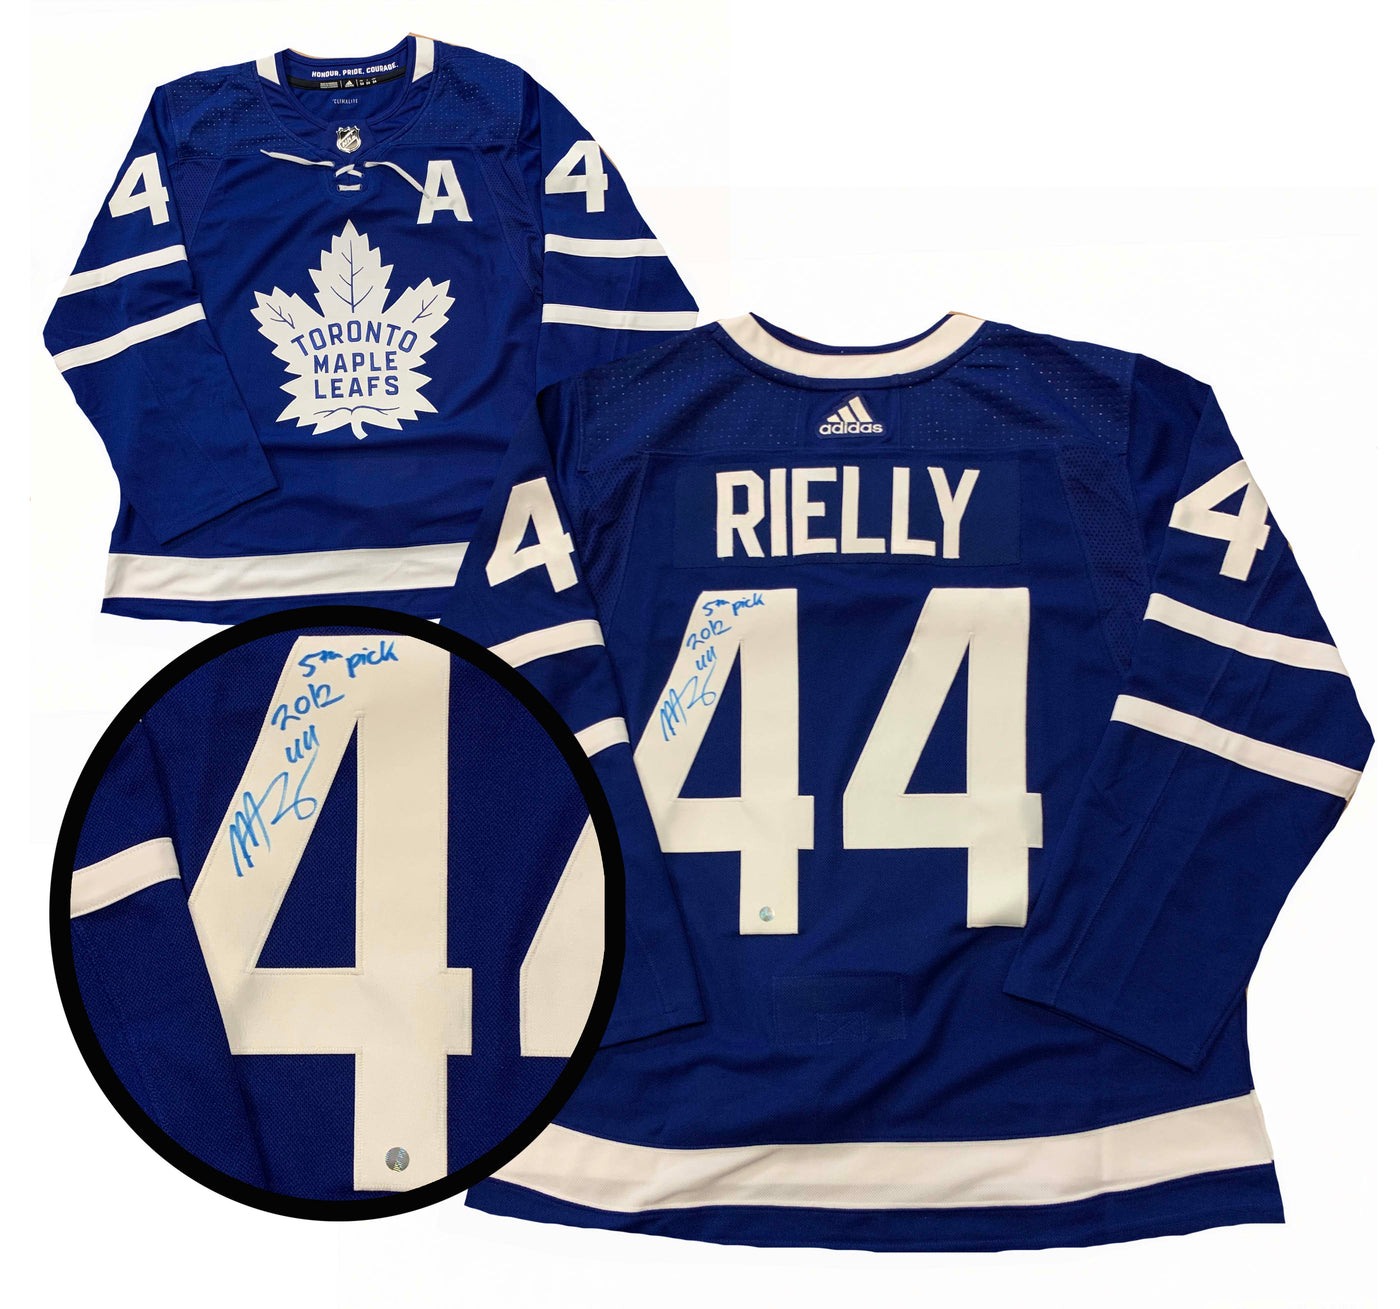 Morgan Rielly Toronto Maple Leafs Blue Adidas Jersey Inscribed 5th Pick 2012